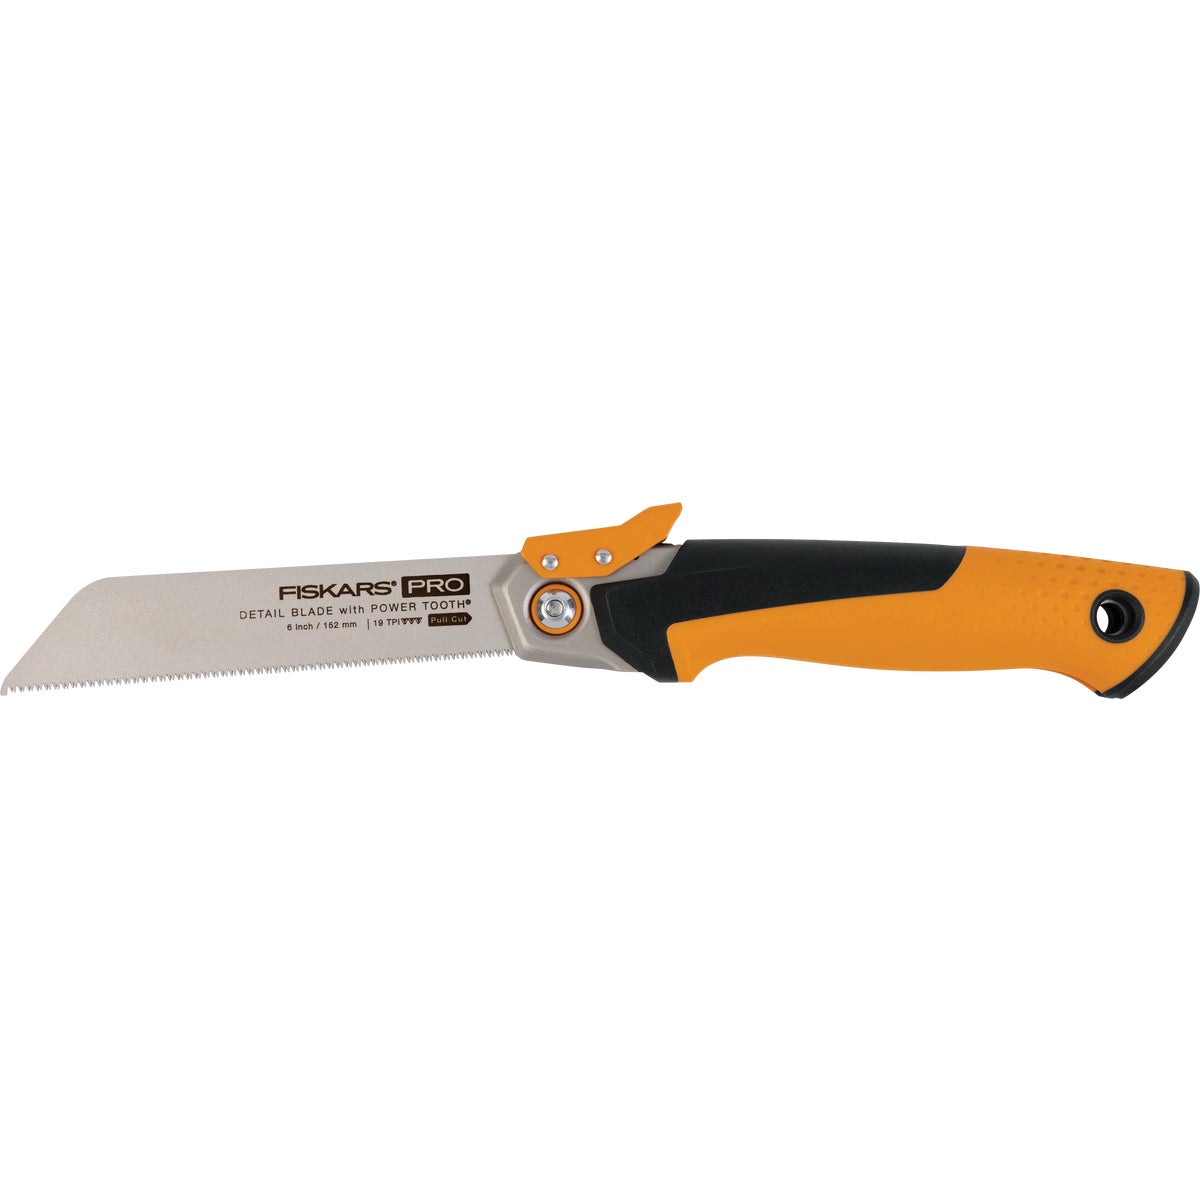 Fiskars Pro POWER TOOTH 6 In. Blade 10 TPI Folding Detail Saw